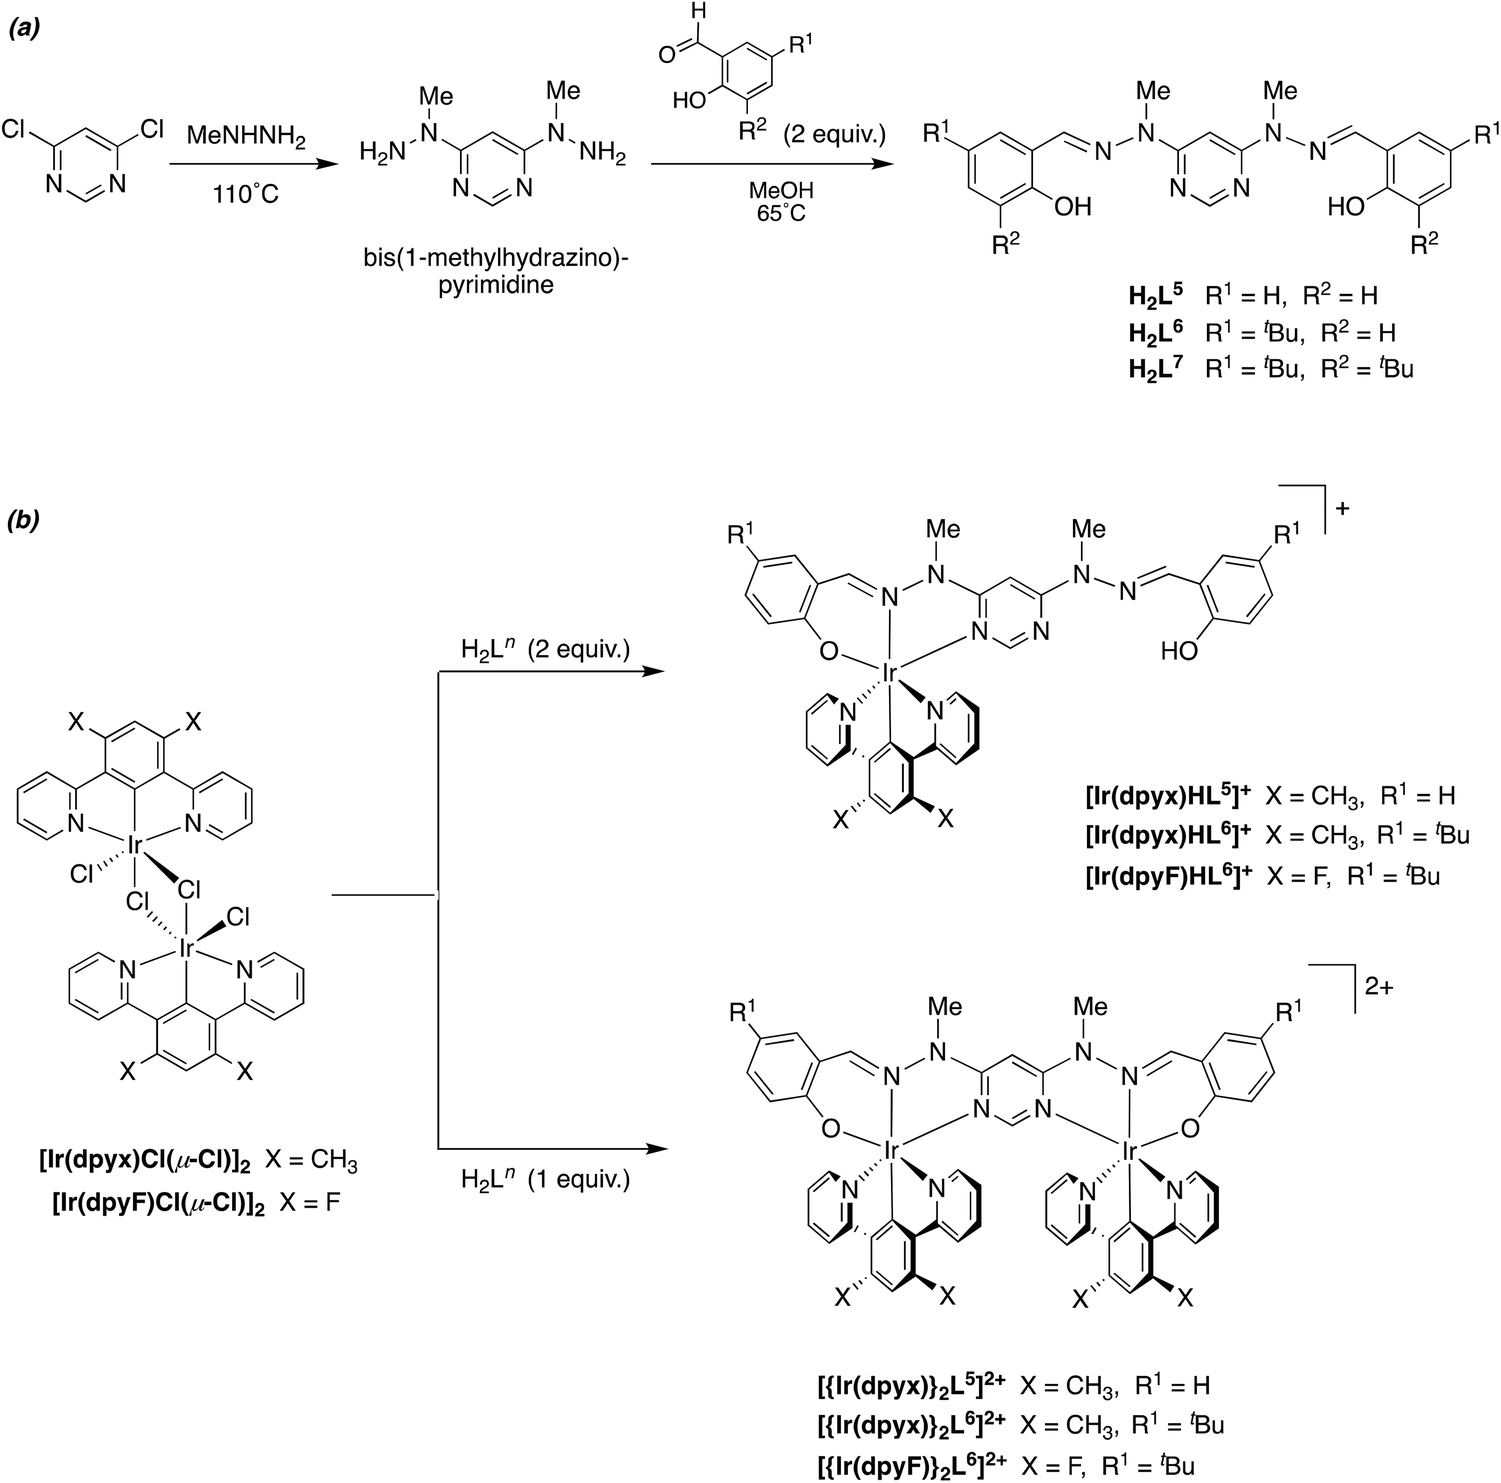 Mono And Dinuclear Iridium Iii Complexes Featuring Bis Tridentate Coordination And Schiff Base Bridging Ligands The Beneficial Effect Of A Second Dalton Transactions Rsc Publishing Doi 10 1039 D0dtj